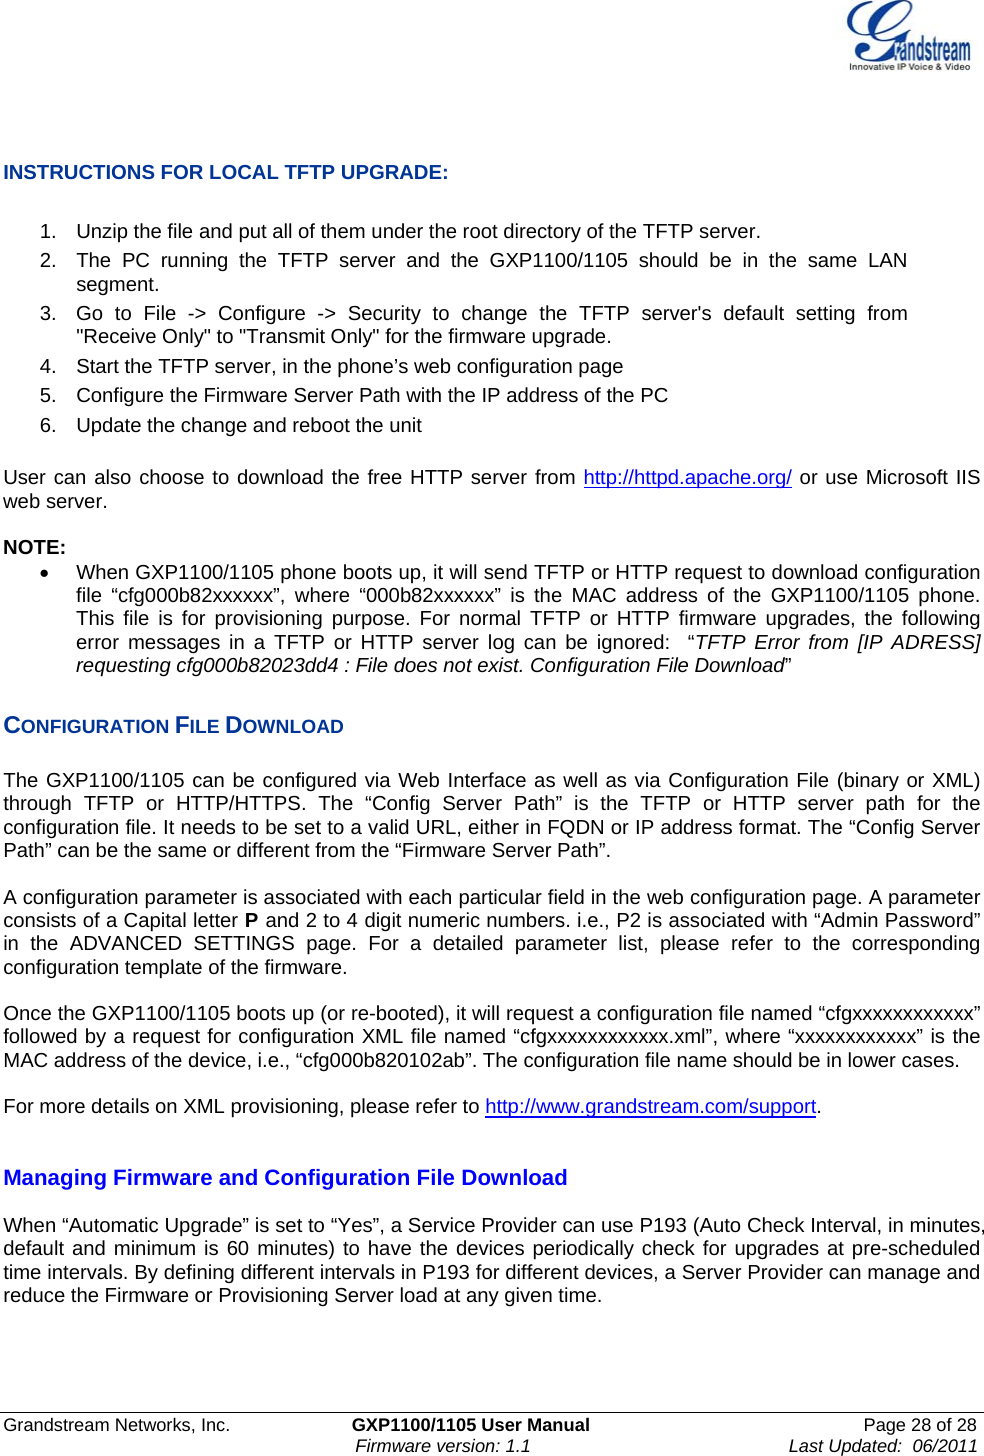    Grandstream Networks, Inc.                        GXP1100/1105 User Manual                                                      Page 28 of 28                                                                      Firmware version: 1.1                                                   Last Updated:  06/2011    INSTRUCTIONS FOR LOCAL TFTP UPGRADE:  1.  Unzip the file and put all of them under the root directory of the TFTP server.  2.  The PC running the TFTP server and the GXP1100/1105 should be in the same LAN segment. 3.  Go to File -&gt; Configure -&gt; Security to change the TFTP server&apos;s default setting from &quot;Receive Only&quot; to &quot;Transmit Only&quot; for the firmware upgrade.  4.  Start the TFTP server, in the phone’s web configuration page 5.  Configure the Firmware Server Path with the IP address of the PC 6.  Update the change and reboot the unit   User can also choose to download the free HTTP server from http://httpd.apache.org/ or use Microsoft IIS web server.  NOTE: •  When GXP1100/1105 phone boots up, it will send TFTP or HTTP request to download configuration file “cfg000b82xxxxxx”, where “000b82xxxxxx” is the MAC address of the GXP1100/1105 phone. This file is for provisioning purpose. For normal TFTP or HTTP firmware upgrades, the following error messages in a TFTP or HTTP server log can be ignored:  “TFTP Error from [IP ADRESS] requesting cfg000b82023dd4 : File does not exist. Configuration File Download”  CONFIGURATION FILE DOWNLOAD  The GXP1100/1105 can be configured via Web Interface as well as via Configuration File (binary or XML) through TFTP or HTTP/HTTPS. The “Config Server Path” is the TFTP or HTTP server path for the configuration file. It needs to be set to a valid URL, either in FQDN or IP address format. The “Config Server Path” can be the same or different from the “Firmware Server Path”.  A configuration parameter is associated with each particular field in the web configuration page. A parameter consists of a Capital letter P and 2 to 4 digit numeric numbers. i.e., P2 is associated with “Admin Password” in the ADVANCED SETTINGS page. For a detailed parameter list, please refer to the corresponding configuration template of the firmware.   Once the GXP1100/1105 boots up (or re-booted), it will request a configuration file named “cfgxxxxxxxxxxxx” followed by a request for configuration XML file named “cfgxxxxxxxxxxxx.xml”, where “xxxxxxxxxxxx” is the MAC address of the device, i.e., “cfg000b820102ab”. The configuration file name should be in lower cases.  For more details on XML provisioning, please refer to http://www.grandstream.com/support.    Managing Firmware and Configuration File Download  When “Automatic Upgrade” is set to “Yes”, a Service Provider can use P193 (Auto Check Interval, in minutes, default and minimum is 60 minutes) to have the devices periodically check for upgrades at pre-scheduled time intervals. By defining different intervals in P193 for different devices, a Server Provider can manage and reduce the Firmware or Provisioning Server load at any given time.  